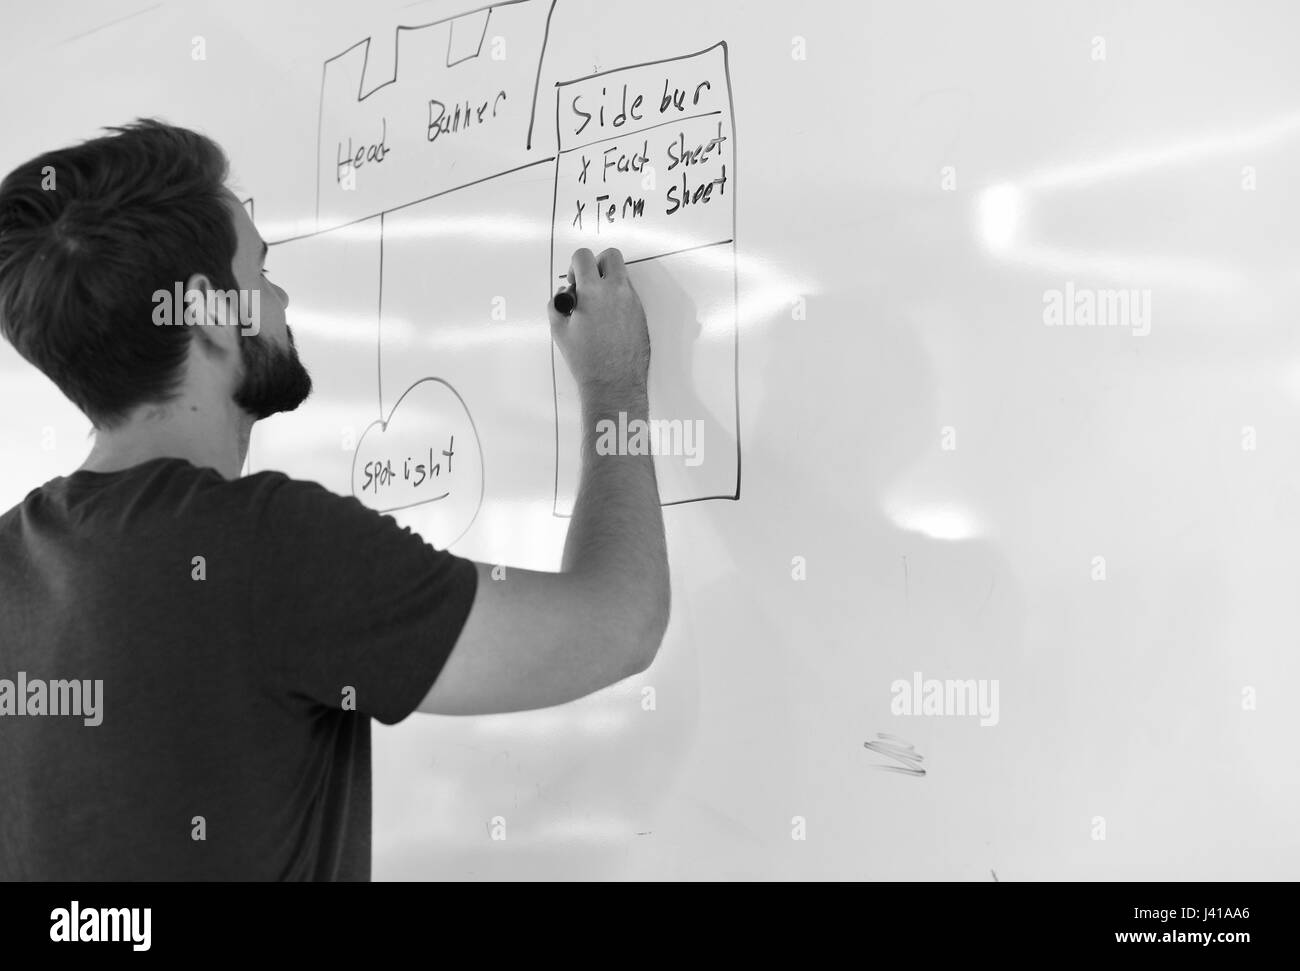 Startup Business People Writing on White Board Sharing Planning Strategy Stock Photo